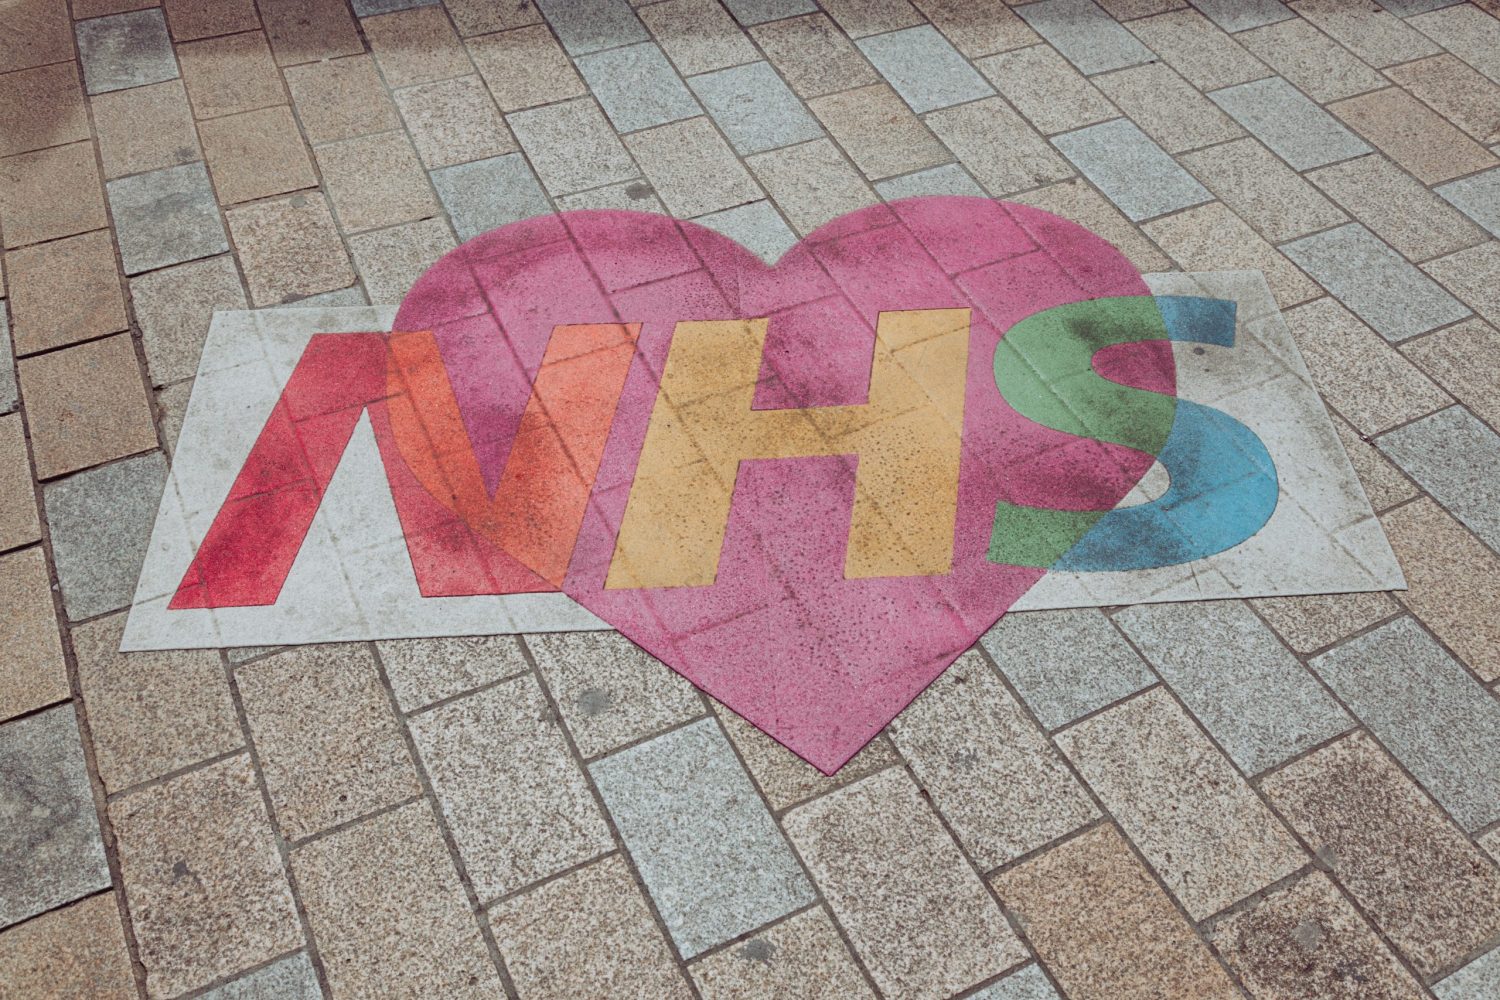 A colourful NHS logo over a pink heart, painted on the ground. Photo by Nicolas J Leclercq on Unsplash.